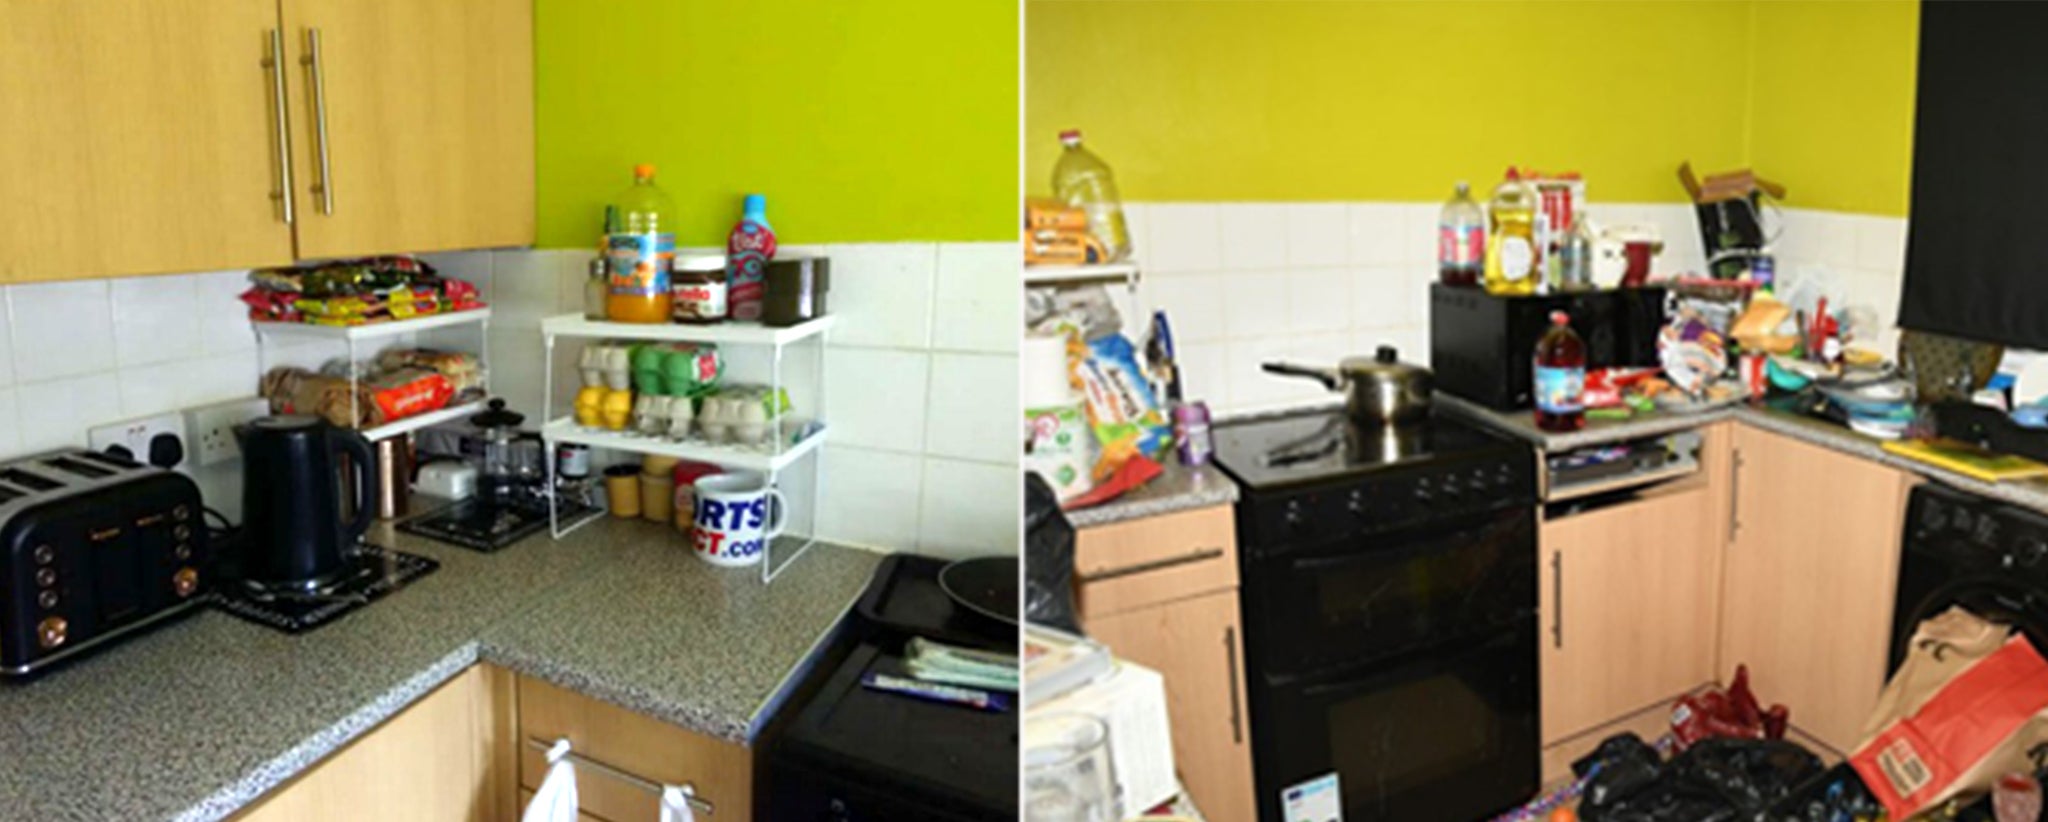 The couple presented their kitchen as clean and tidy but jurors were shown photos of it overflowing with dirty plates and rubbish